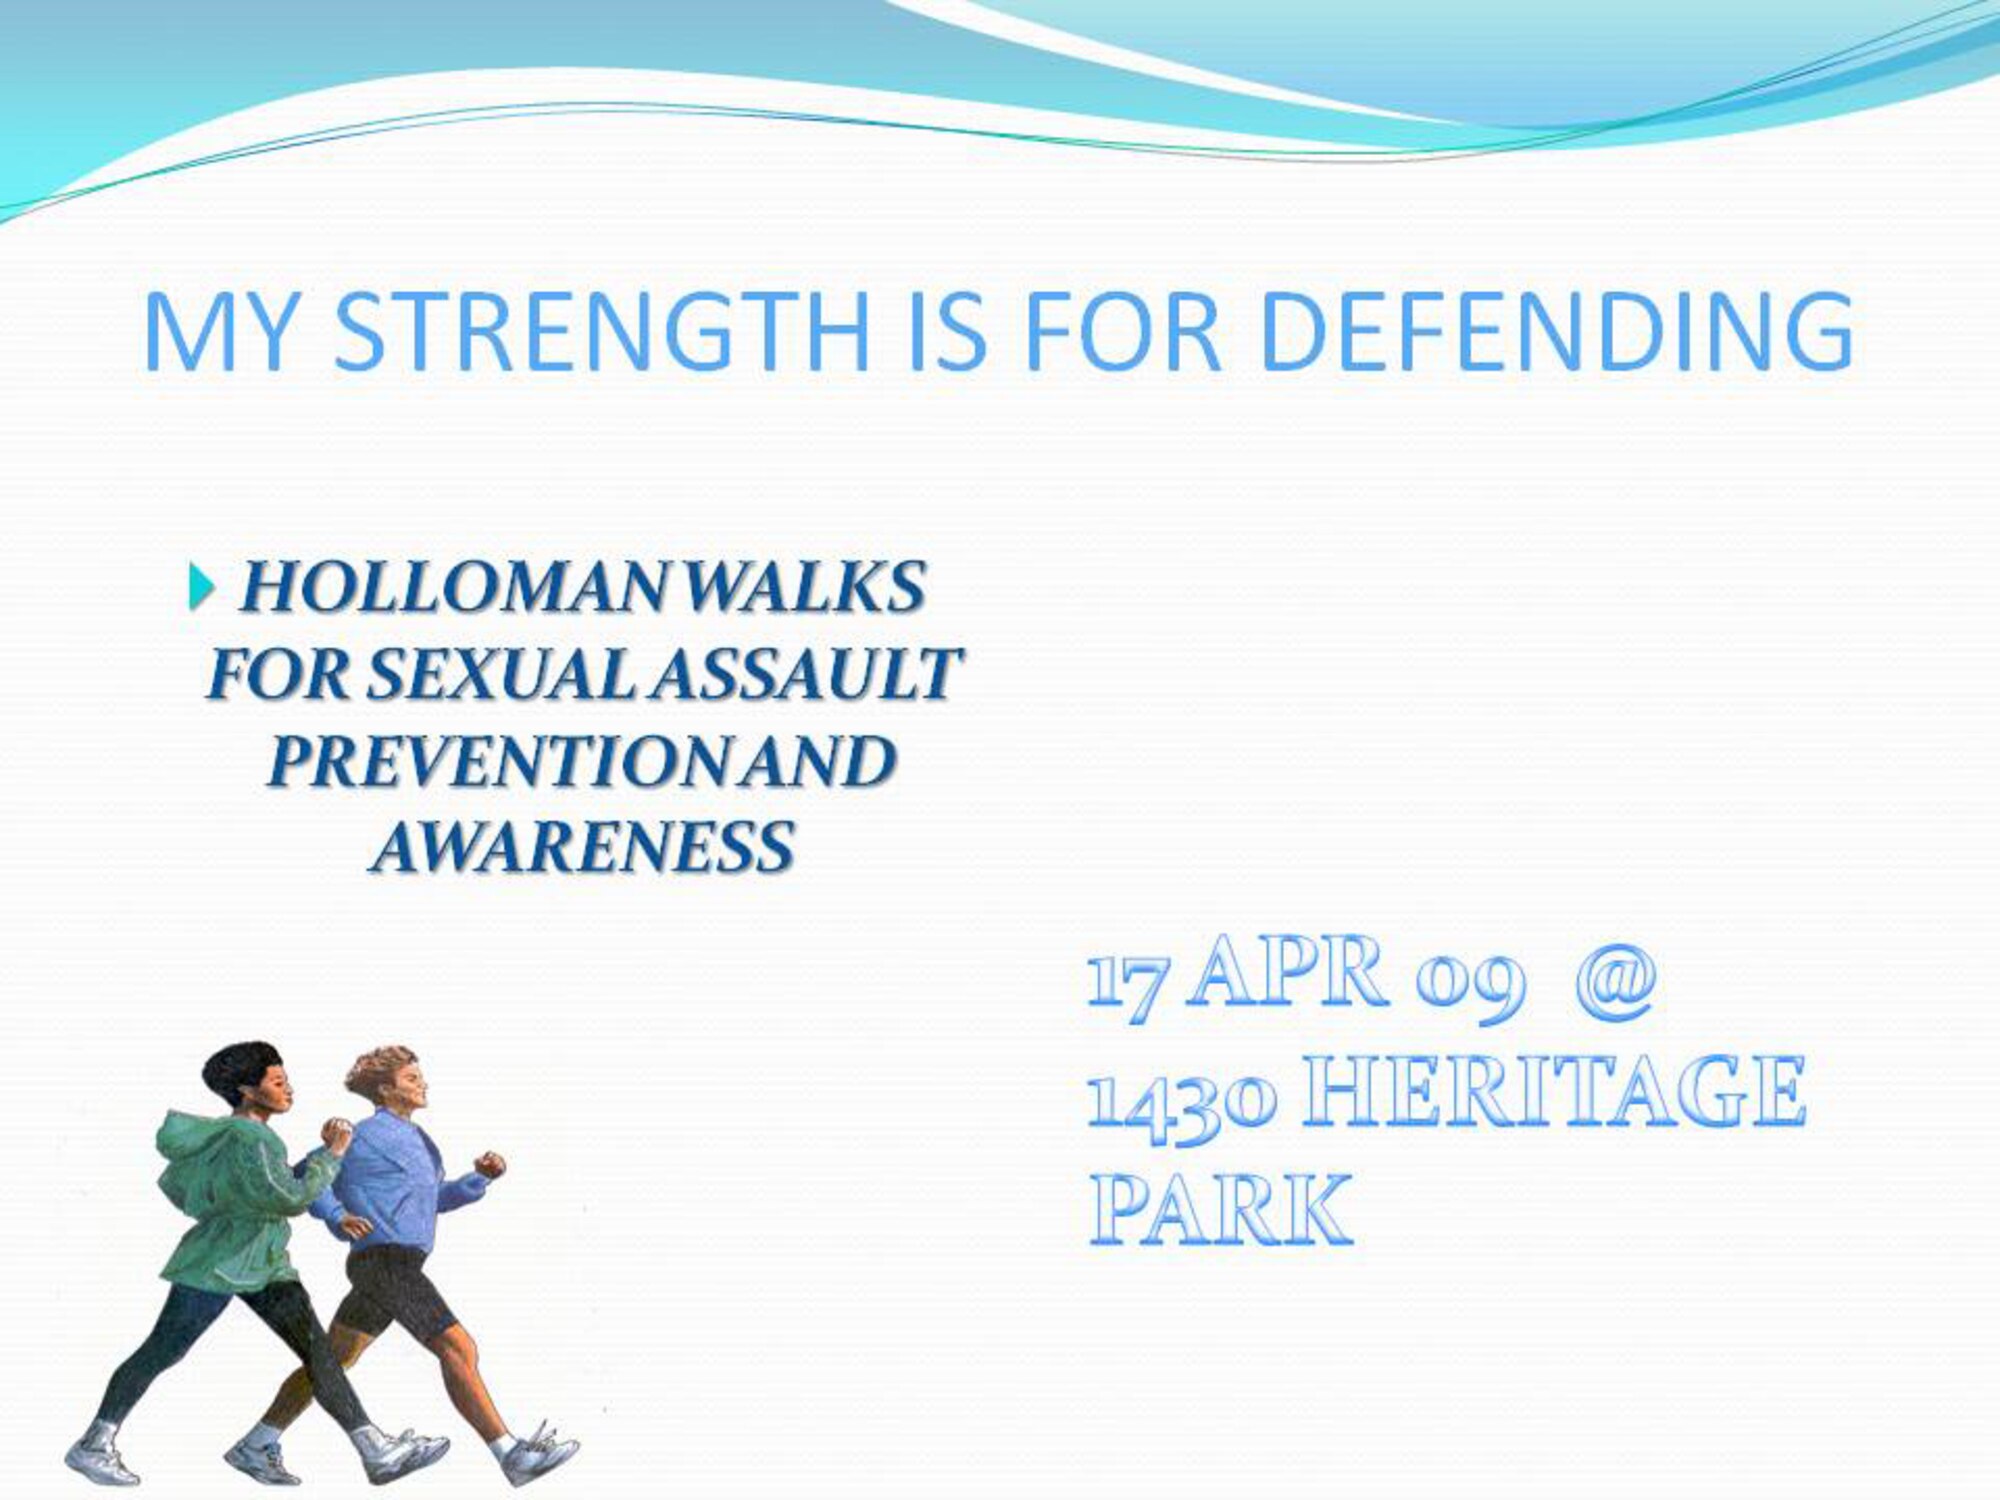 Holloman is walking a mile for Sexual Assault Awareness Month.  Come out to
Heritage Park and participate in the "My Strength is for Defending" Walk.
The walk starts at Heritage Park at 1430 on the 17th of April, 2009.  For
questions call the Sexual Assault Prevention and Response Office at
572-6789.     

 

Tracey Spencer

Sexual Assault Response Coordinator 
